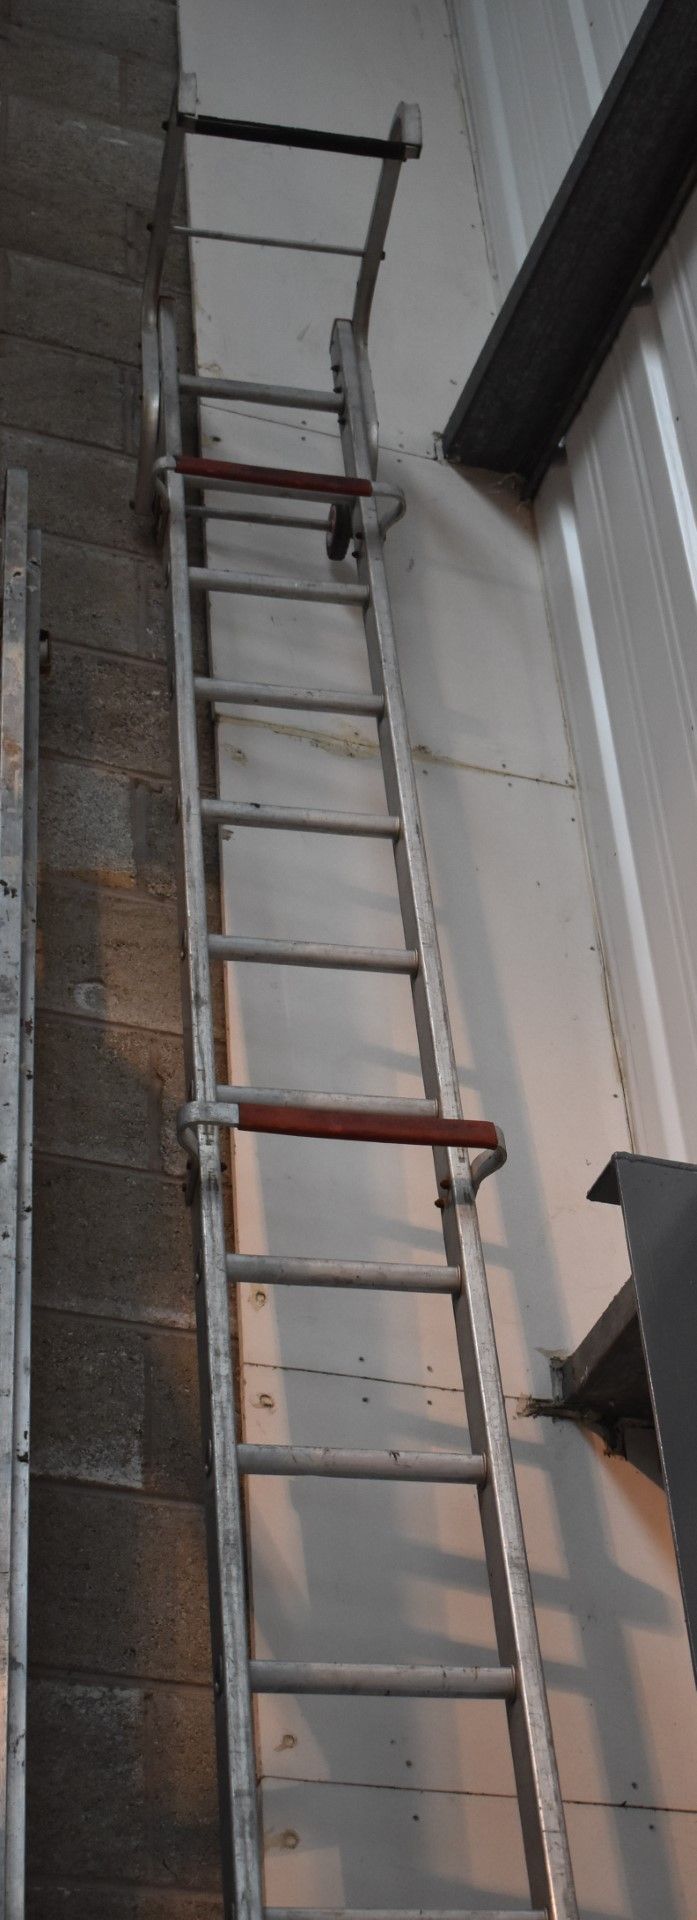 1 x Set of Single Section 18ft Roof Ladders - Approx Height 550 cms Width 31 cms - Ref 417 - CL501 - - Image 2 of 7